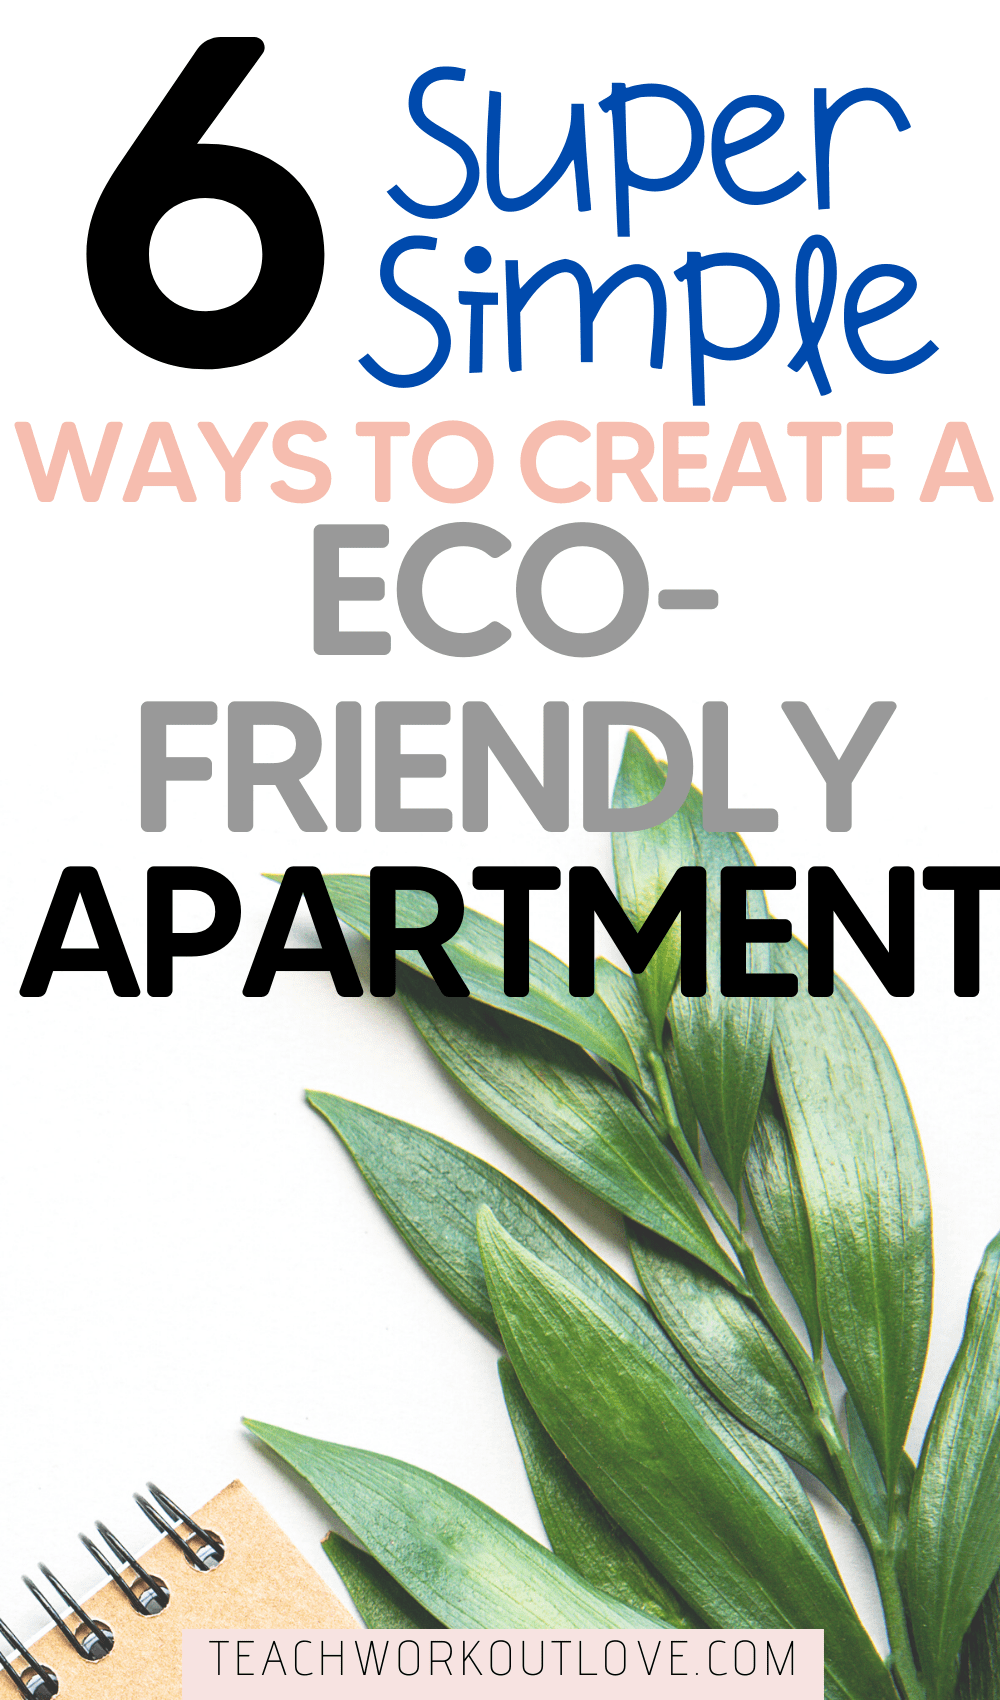 Check out these 6 key tips to create an eco-friendly apartment or home in 2020. Going green can help save the environment and is great for your health.